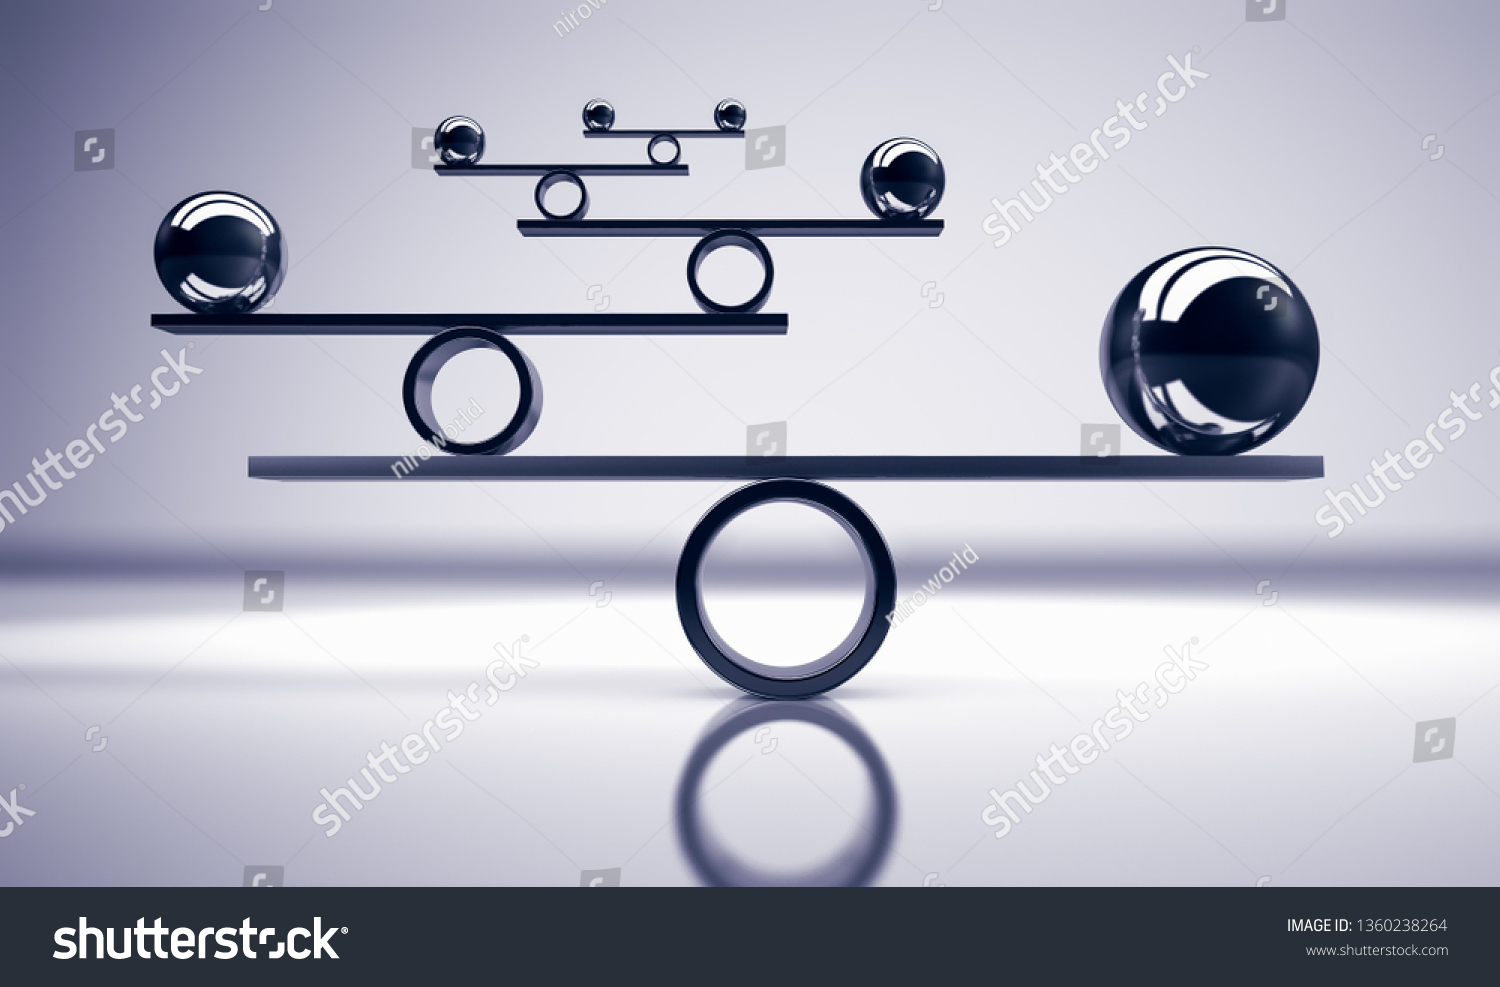 108,532 Stability concept Images, Stock Photos & Vectors | Shutterstock